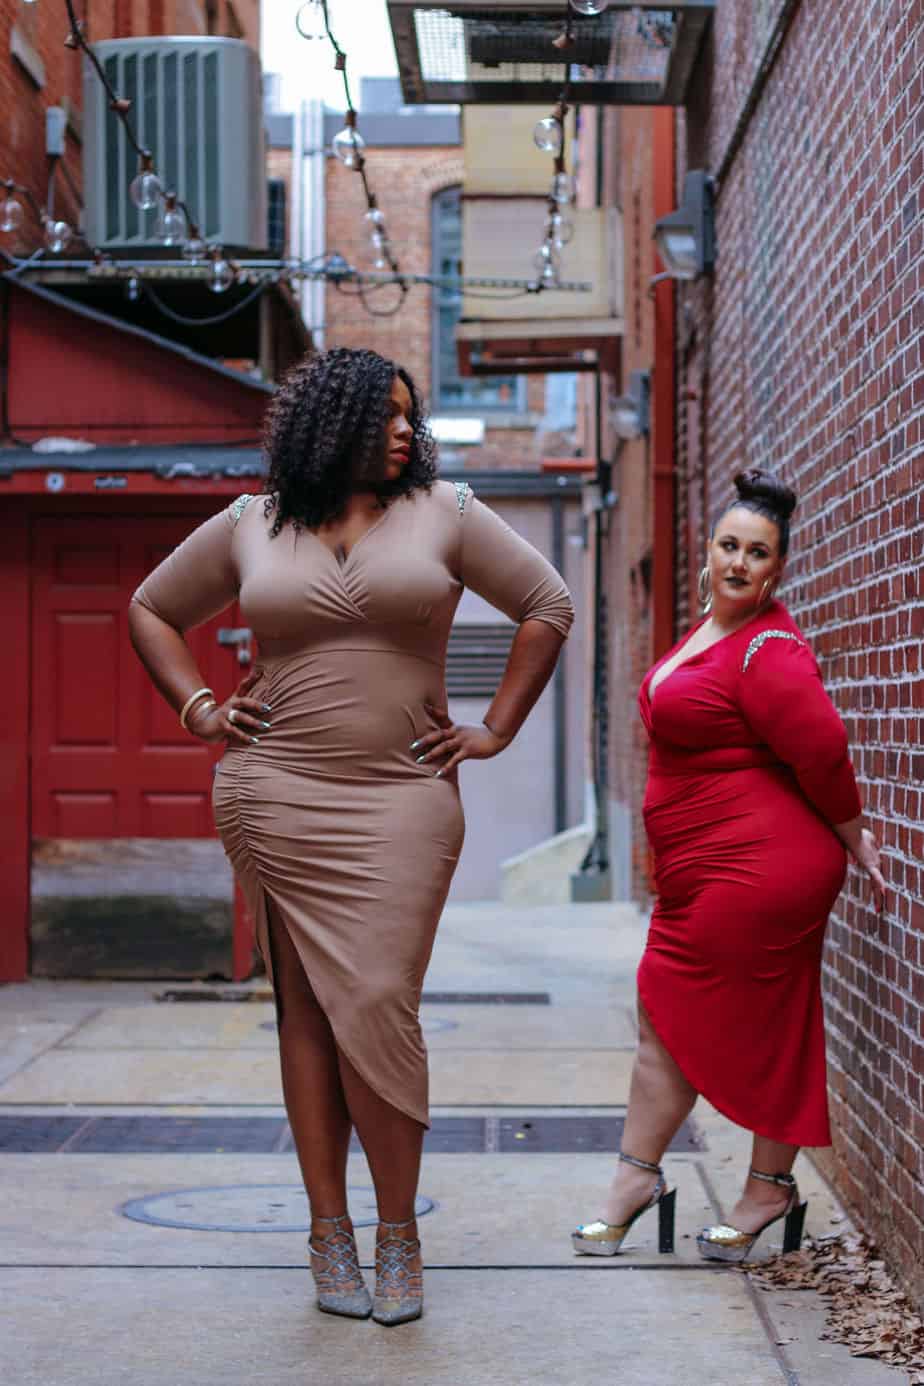 Plus Size Tall, Plus Size Clothing